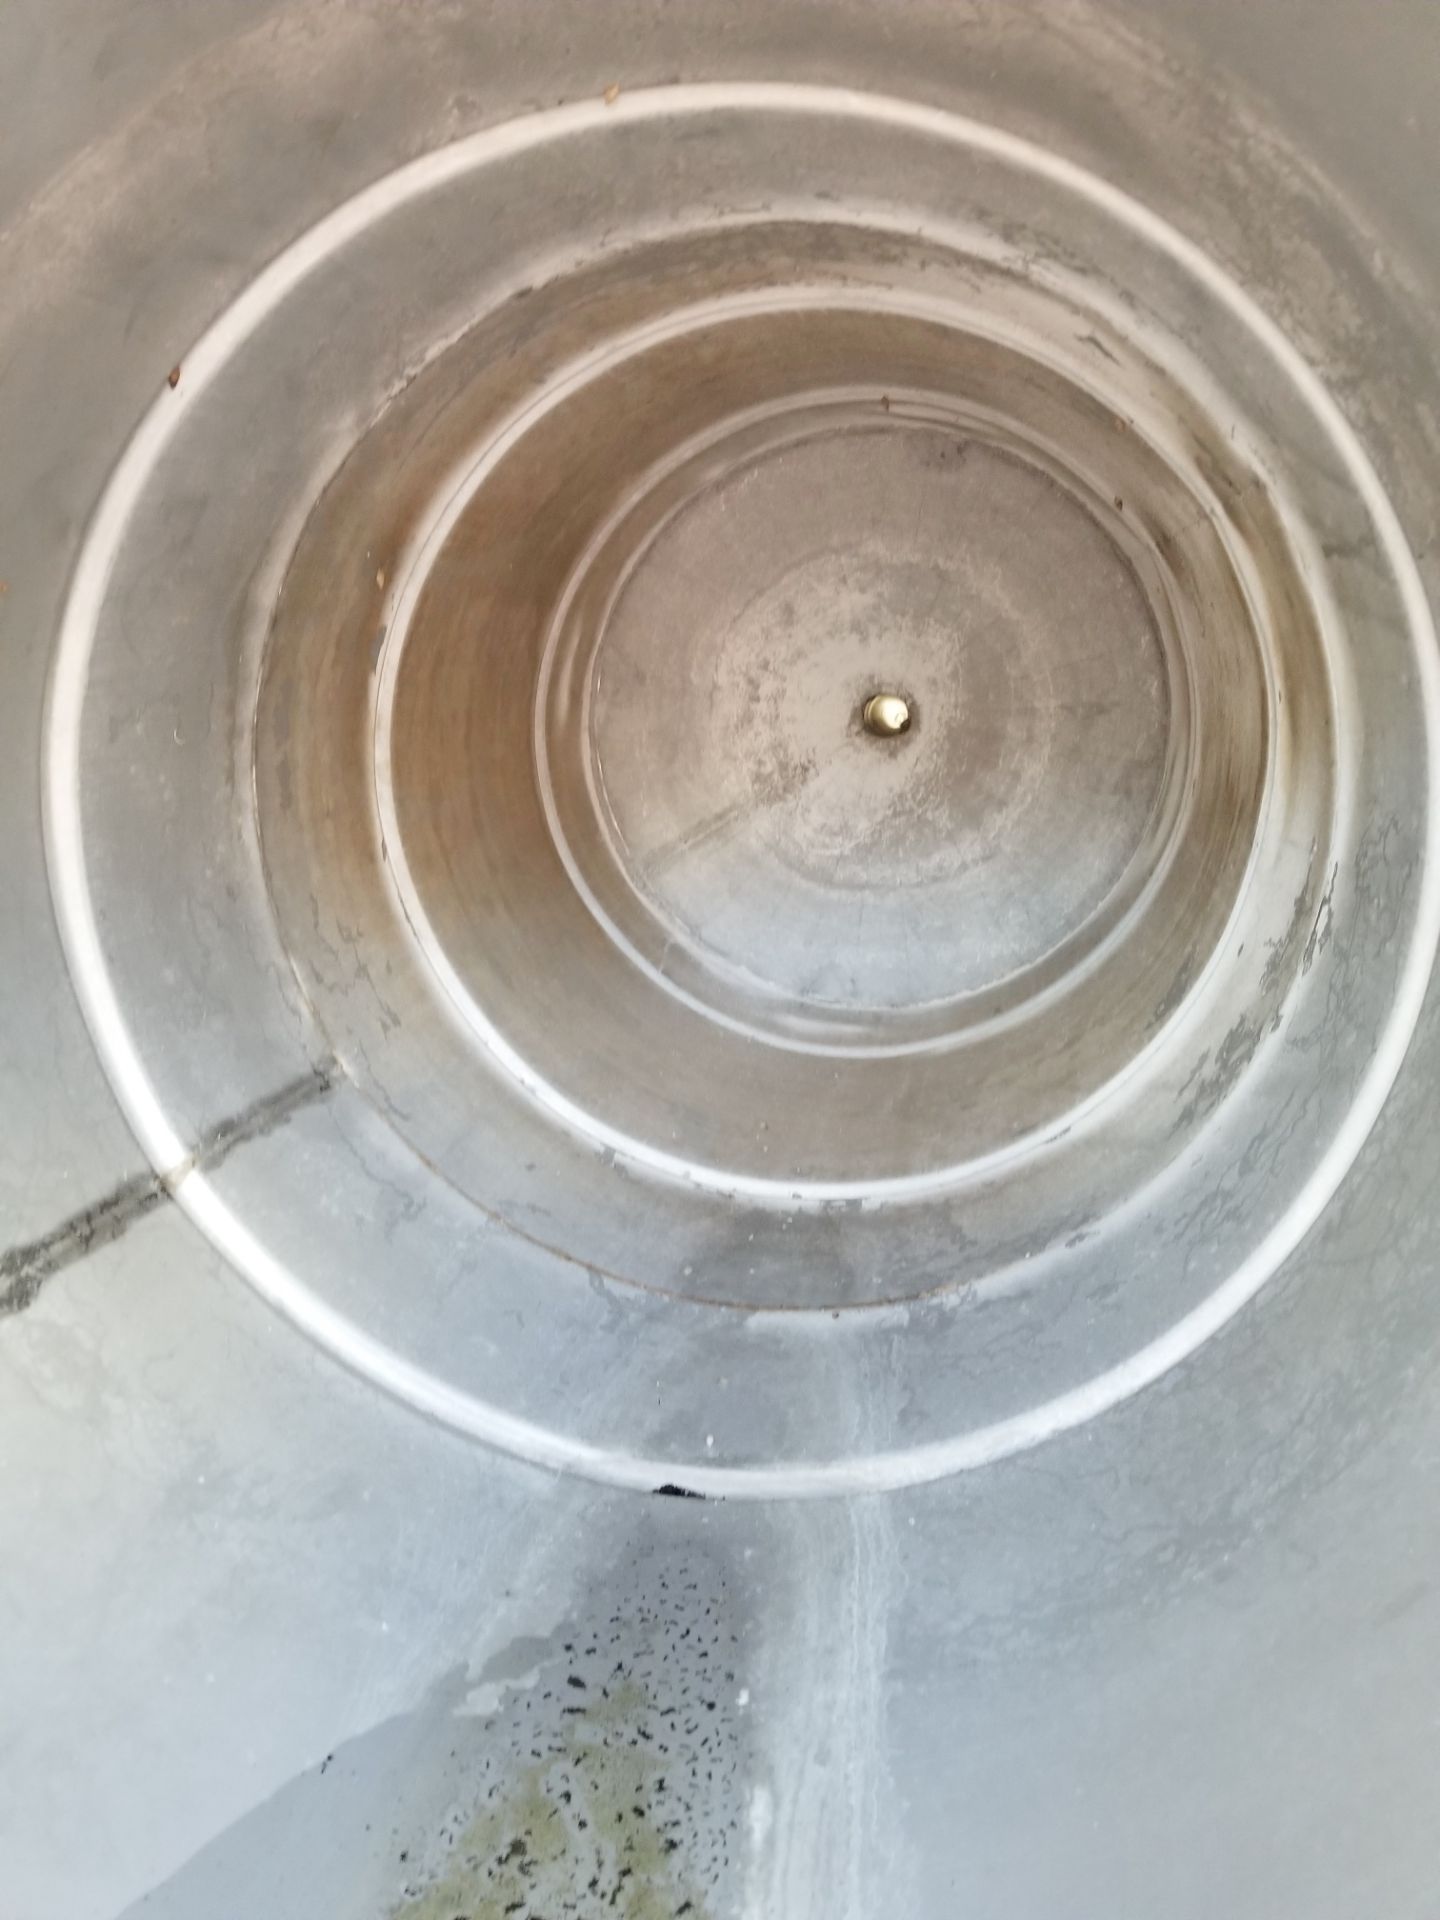 493 Gallon Alcohol Storage Stainless steel Tank - Image 6 of 6